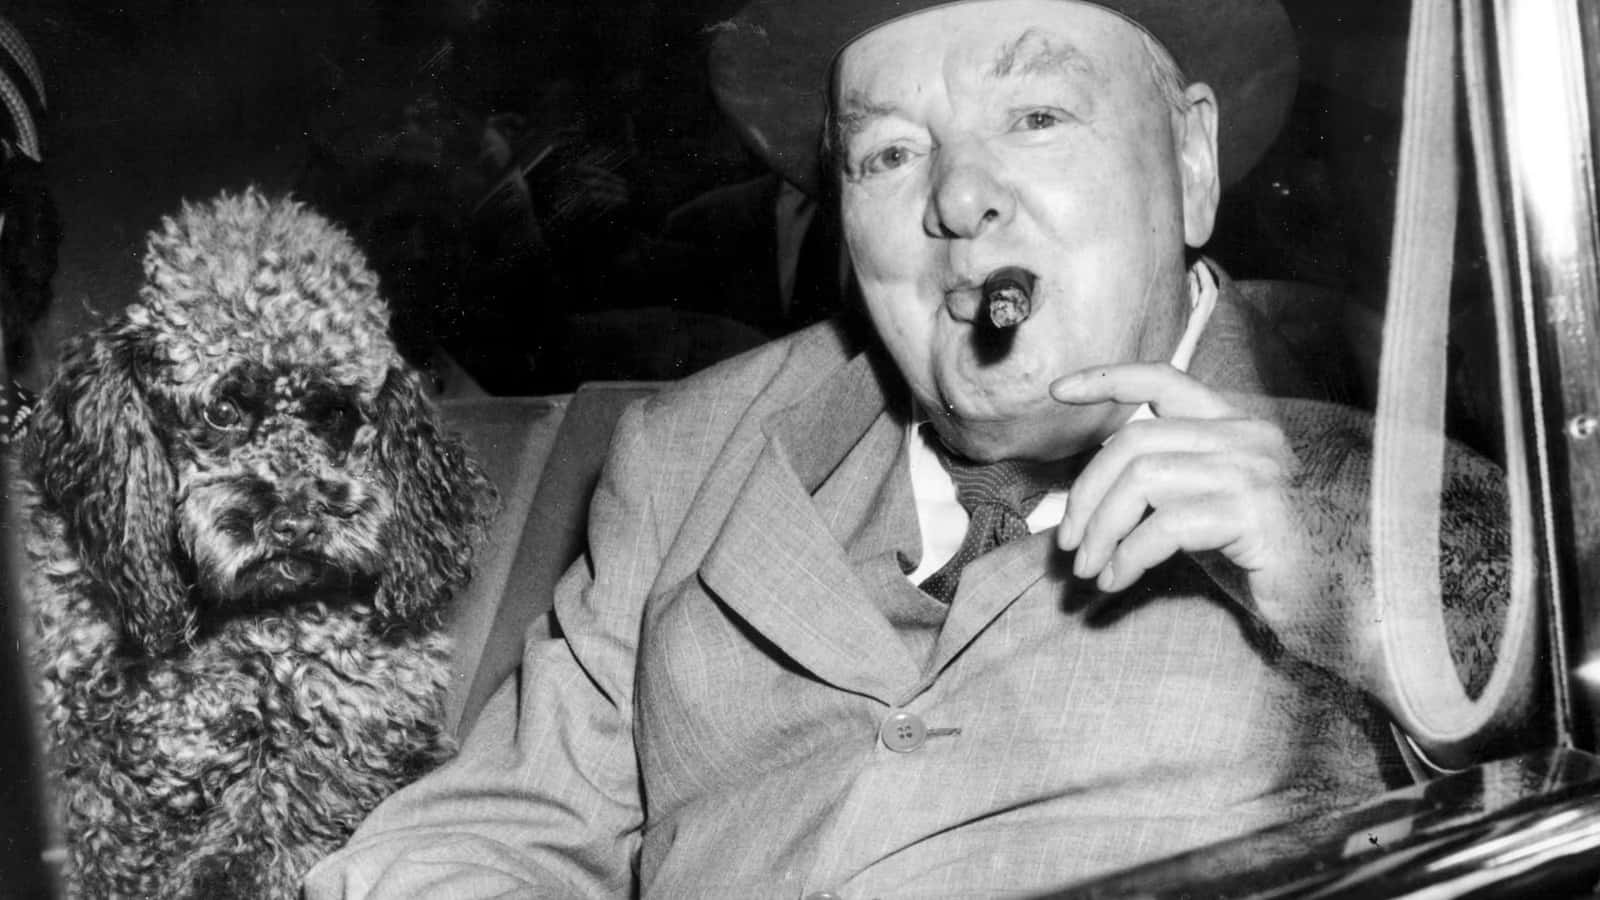 A Man In A Suit Smoking A Cigarette With A Dog